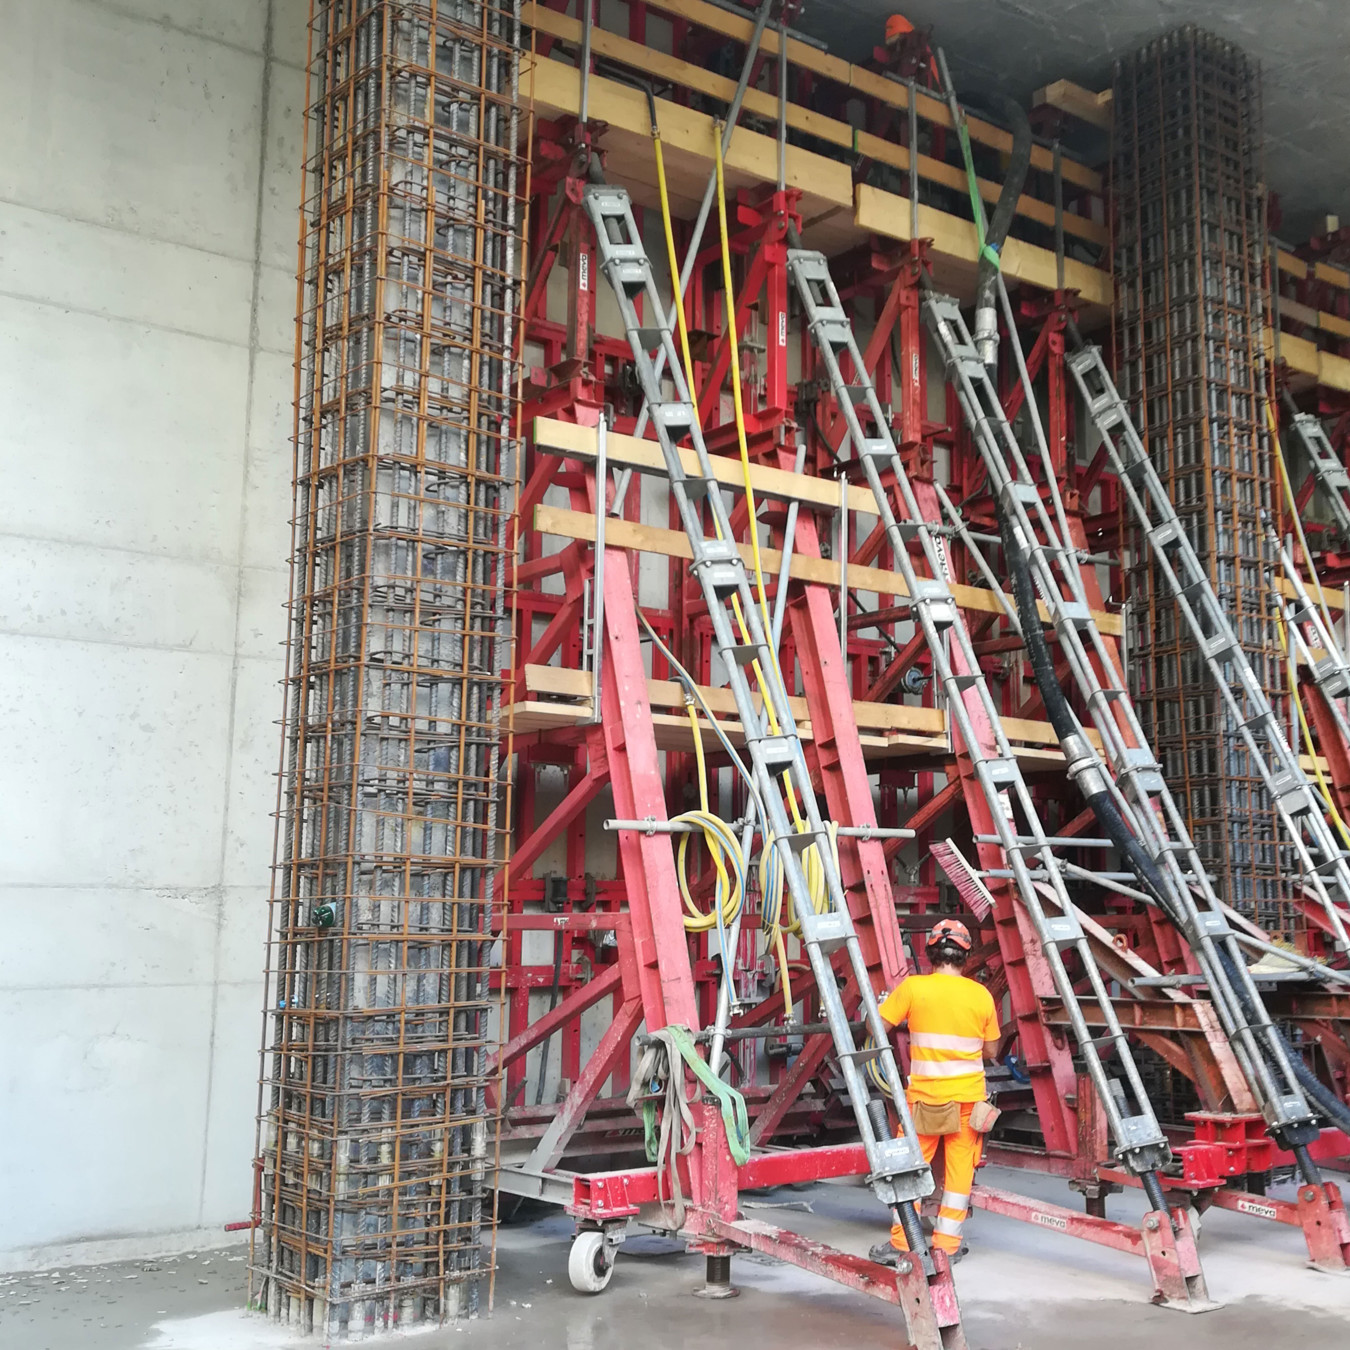 Heavy duty formwork and braces being positioned as part of construction of a concrete wall